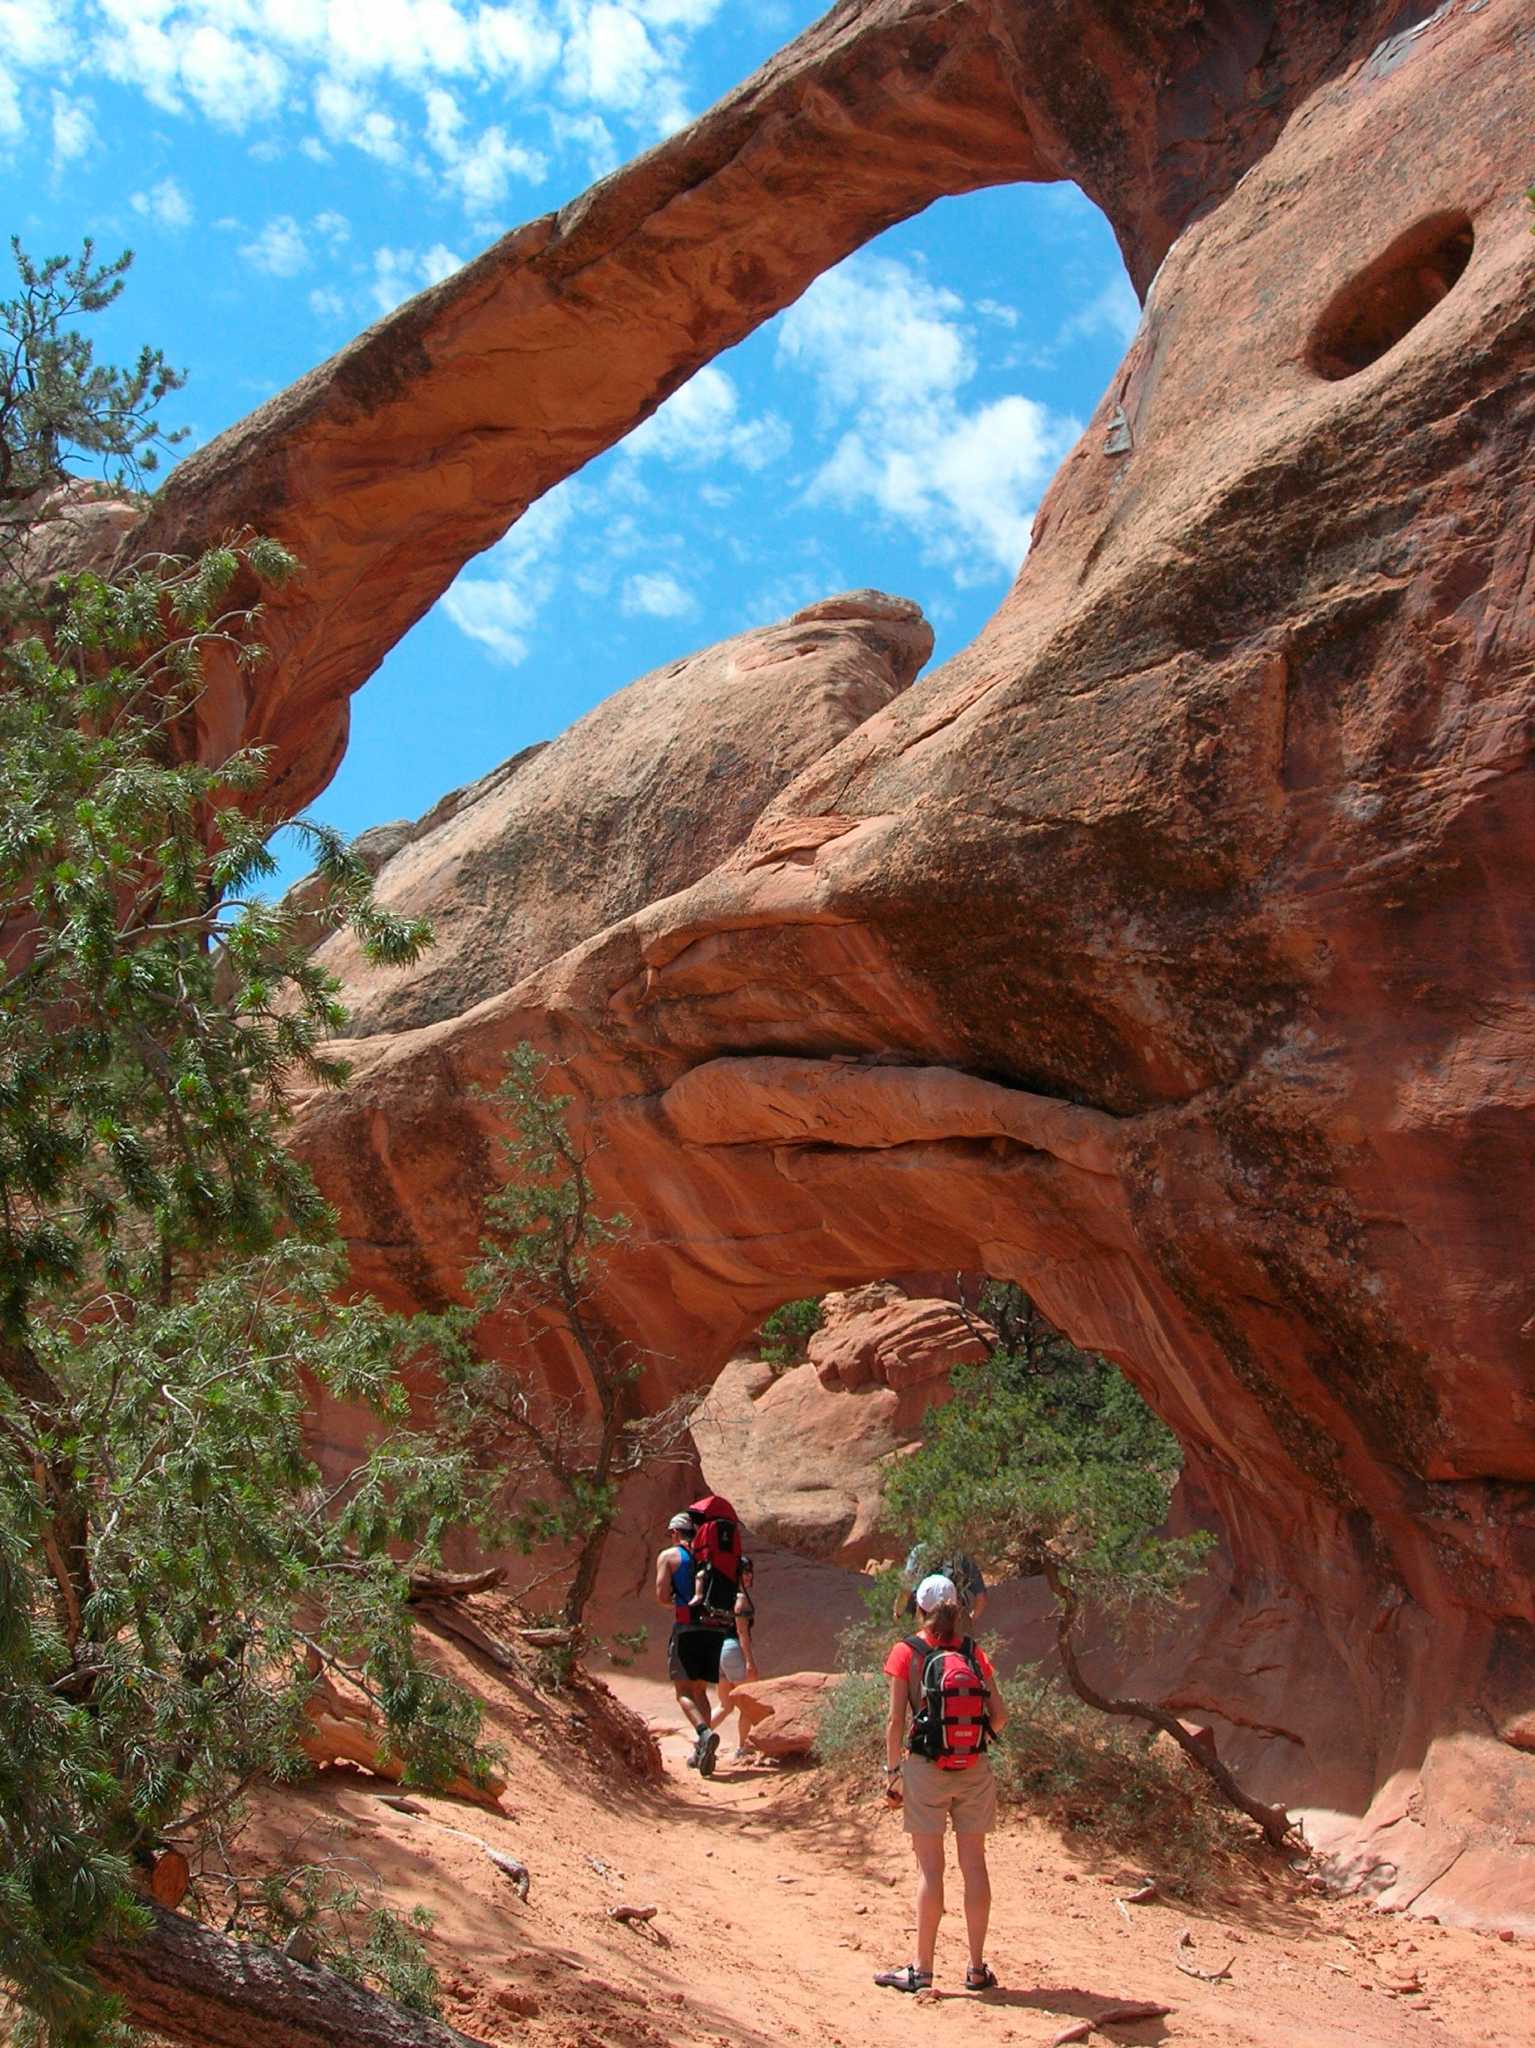 Moab a desert dream for outdoor enthusiasts